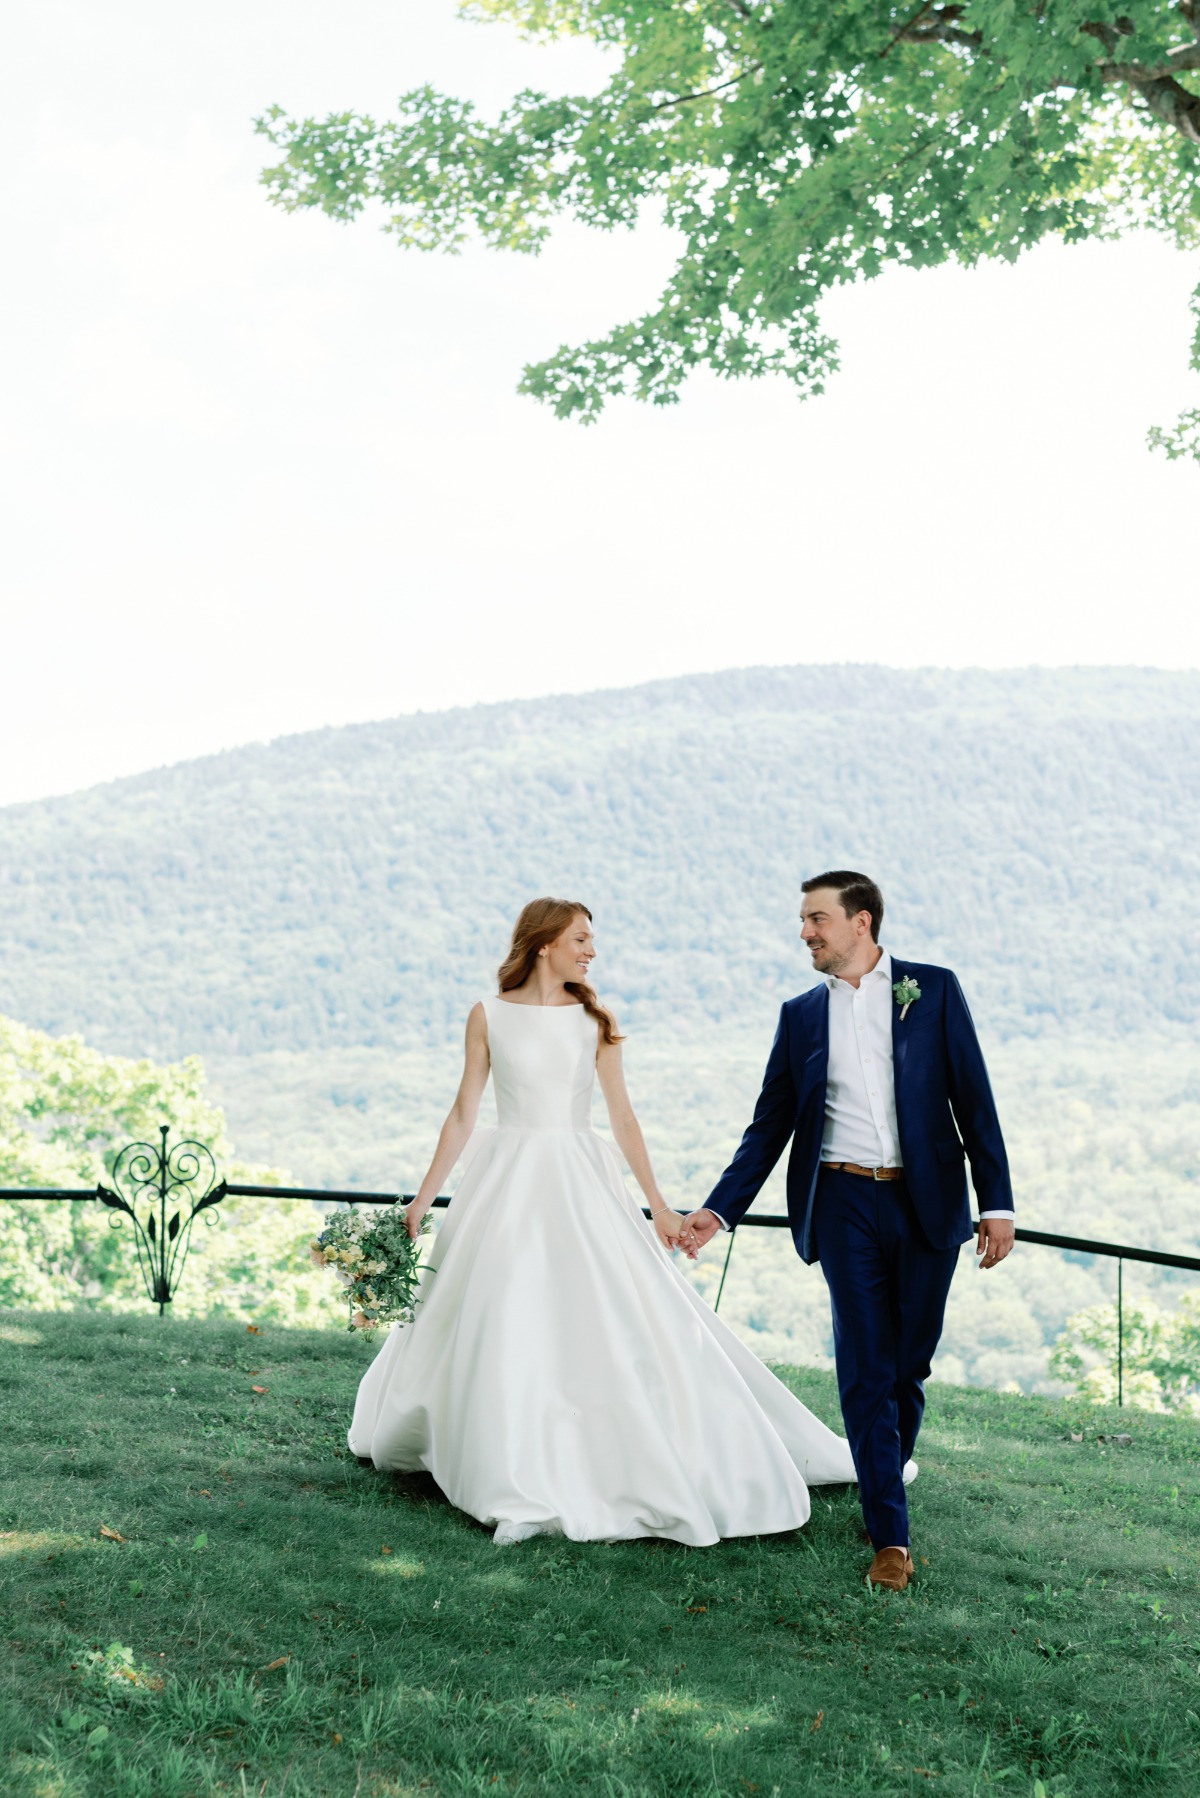 Timeless newlyweds in Vermont outdoor wedding 